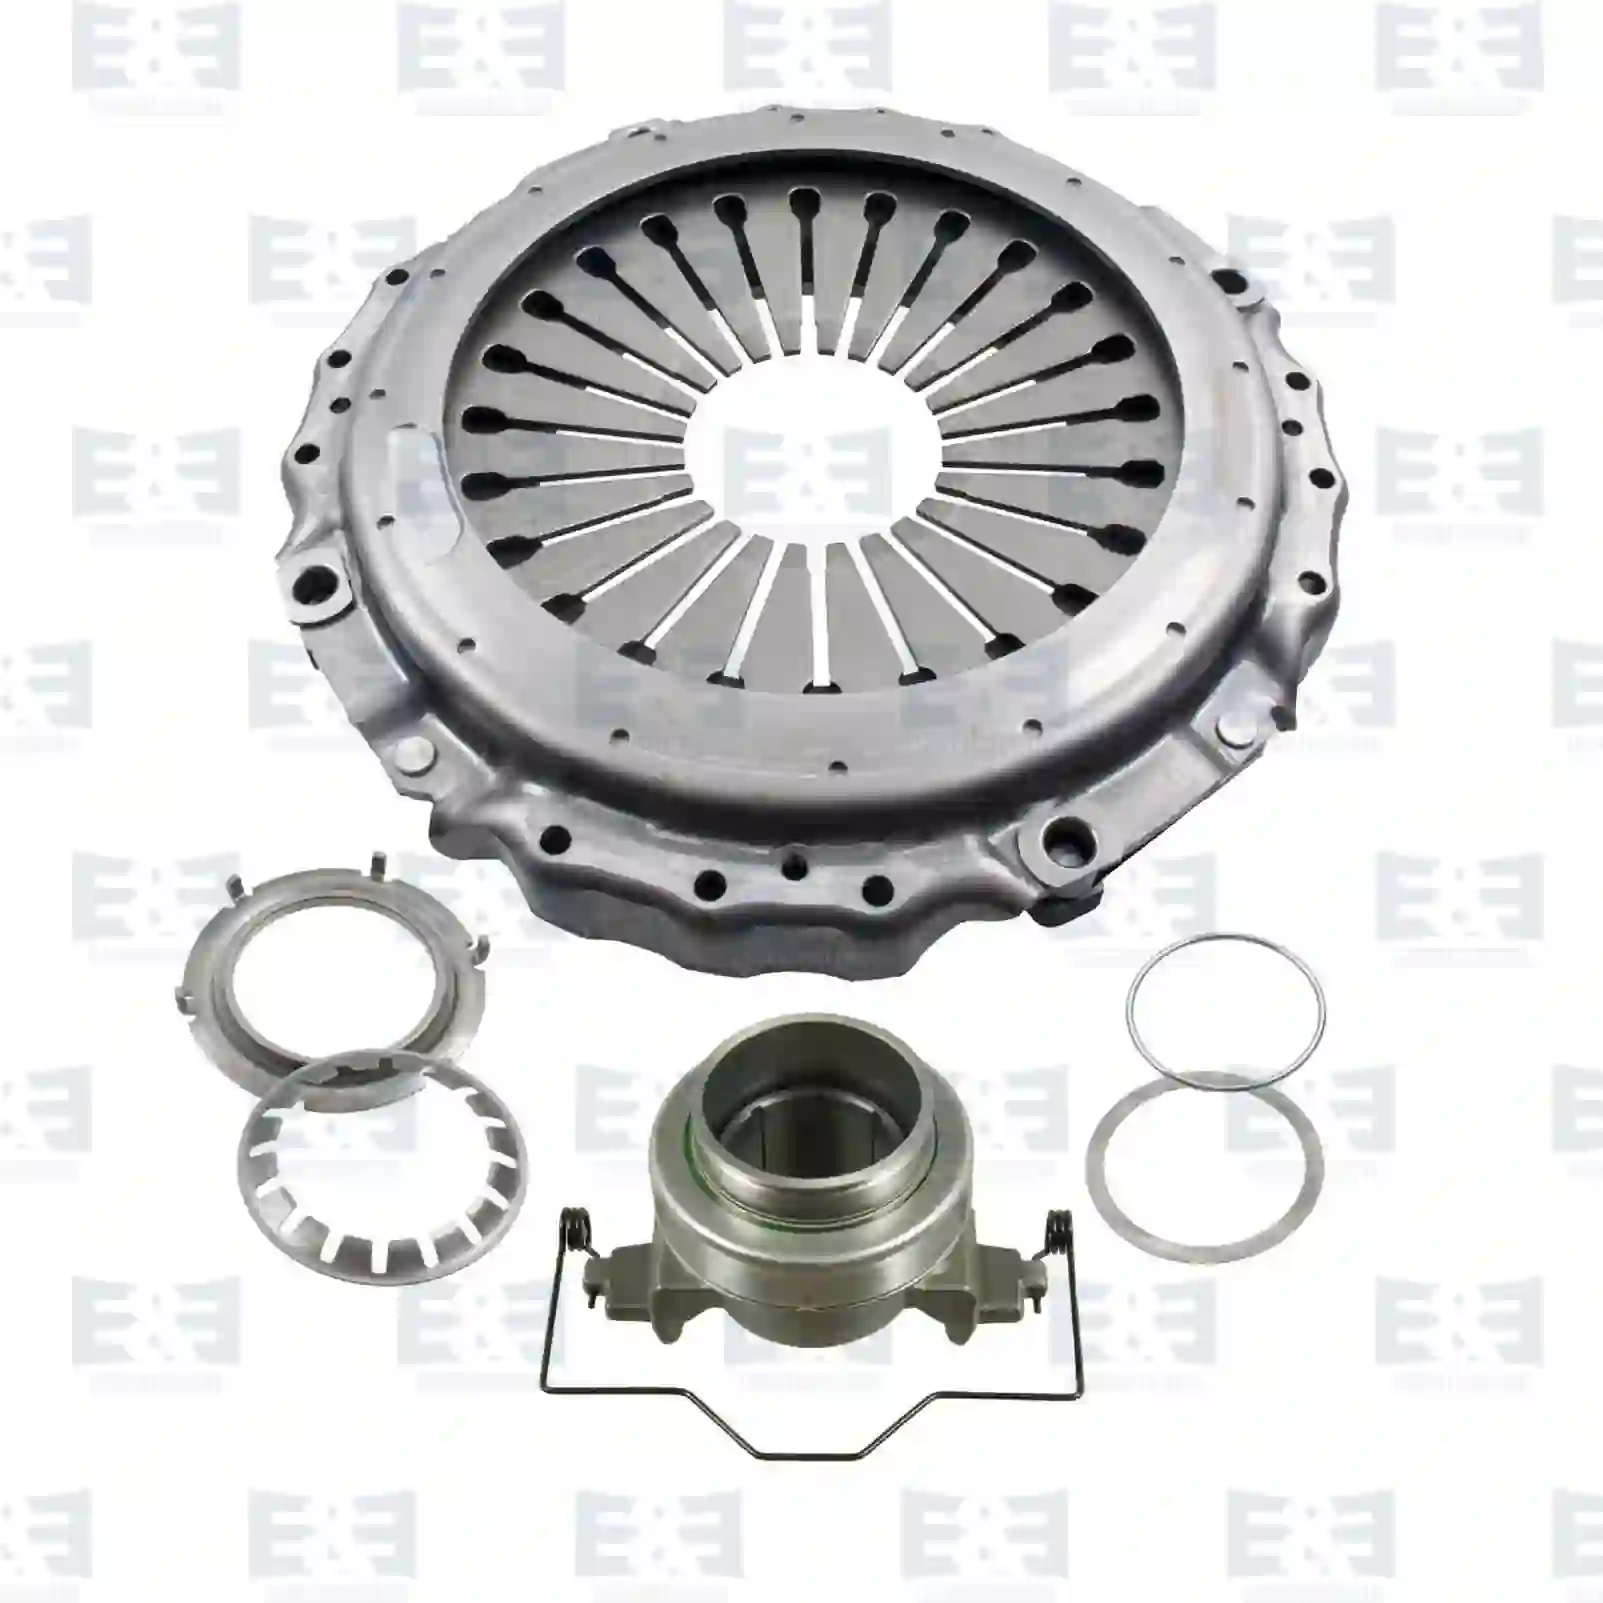 Clutch cover, with release bearing, 2E2288845, 1521713, 20569130, 3192202, 8113514, 8116514, 8119514, 85000525 ||  2E2288845 E&E Truck Spare Parts | Truck Spare Parts, Auotomotive Spare Parts Clutch cover, with release bearing, 2E2288845, 1521713, 20569130, 3192202, 8113514, 8116514, 8119514, 85000525 ||  2E2288845 E&E Truck Spare Parts | Truck Spare Parts, Auotomotive Spare Parts